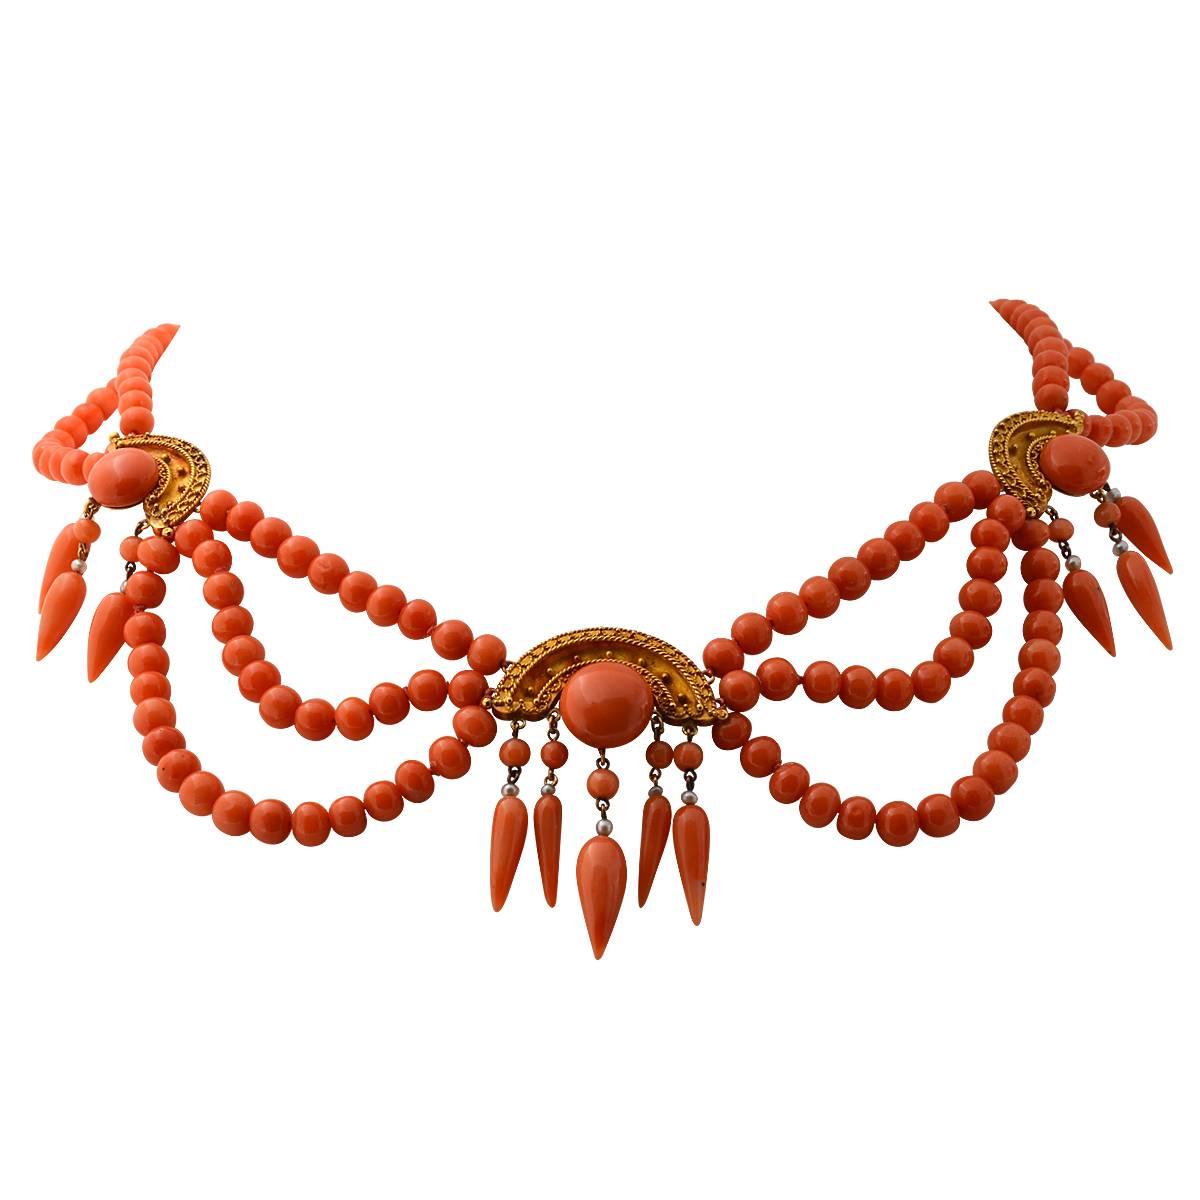 This gorgeous 20k yellow gold Etruscan revival coral set includes a necklace, bracelet, earrings and pin/brooch, circa 1880s.

The necklace weighs 50.30 grams. The necklaces inner circumference measures 16 inches. The necklace starts with two